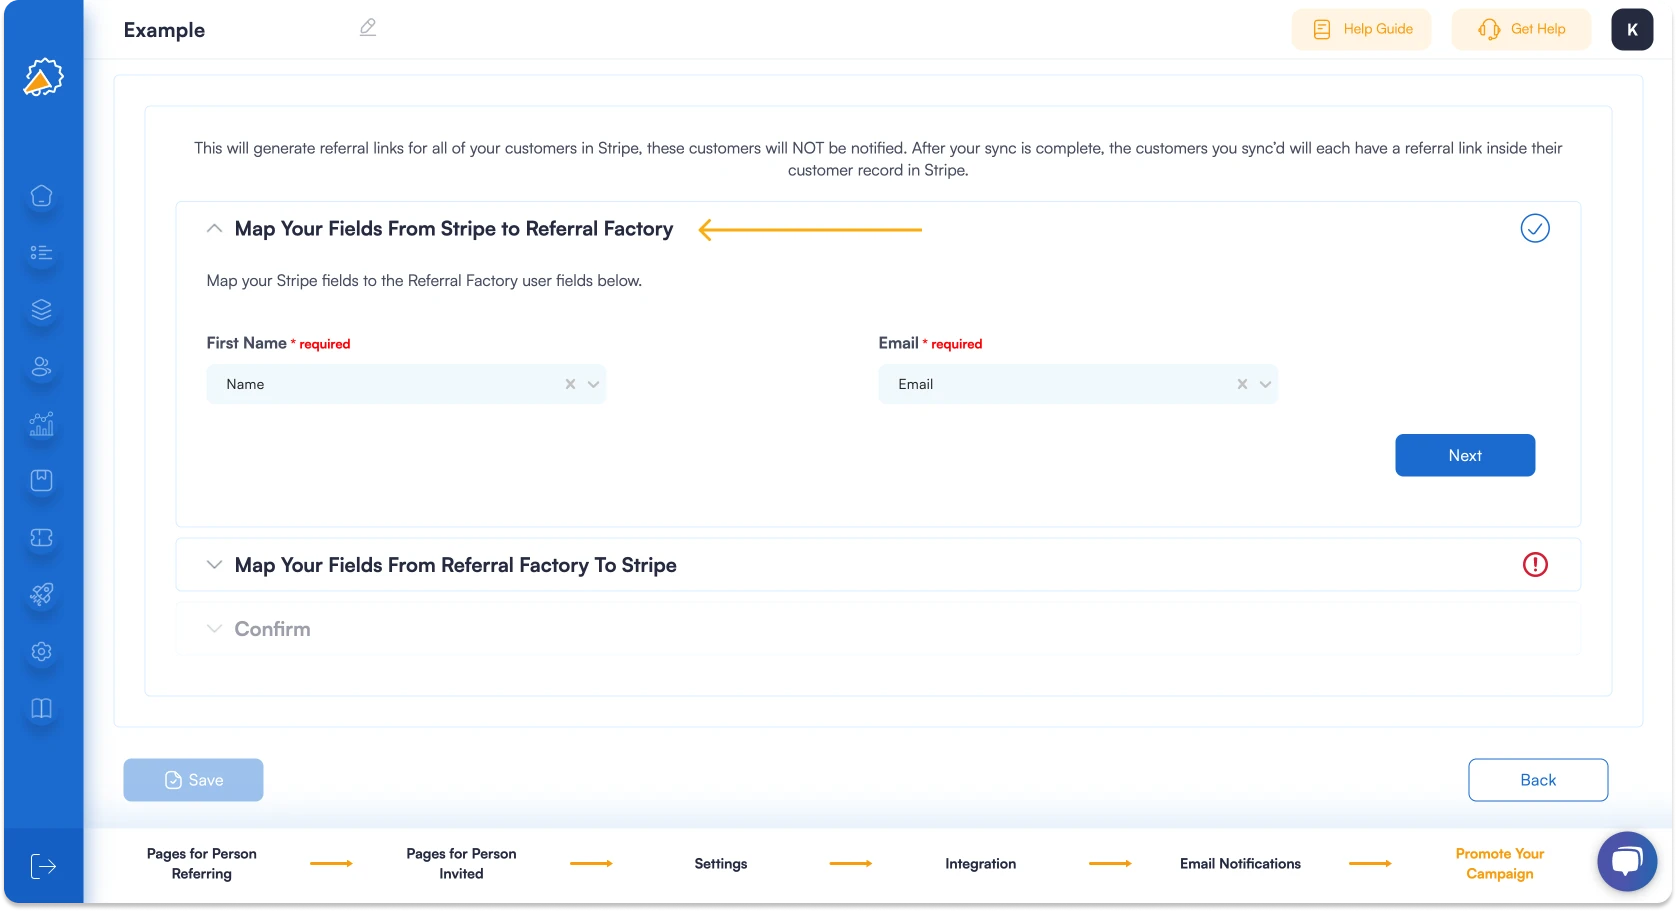 Screenshot showing that you can map your customer contact's details from Stripe to Referral Factory.